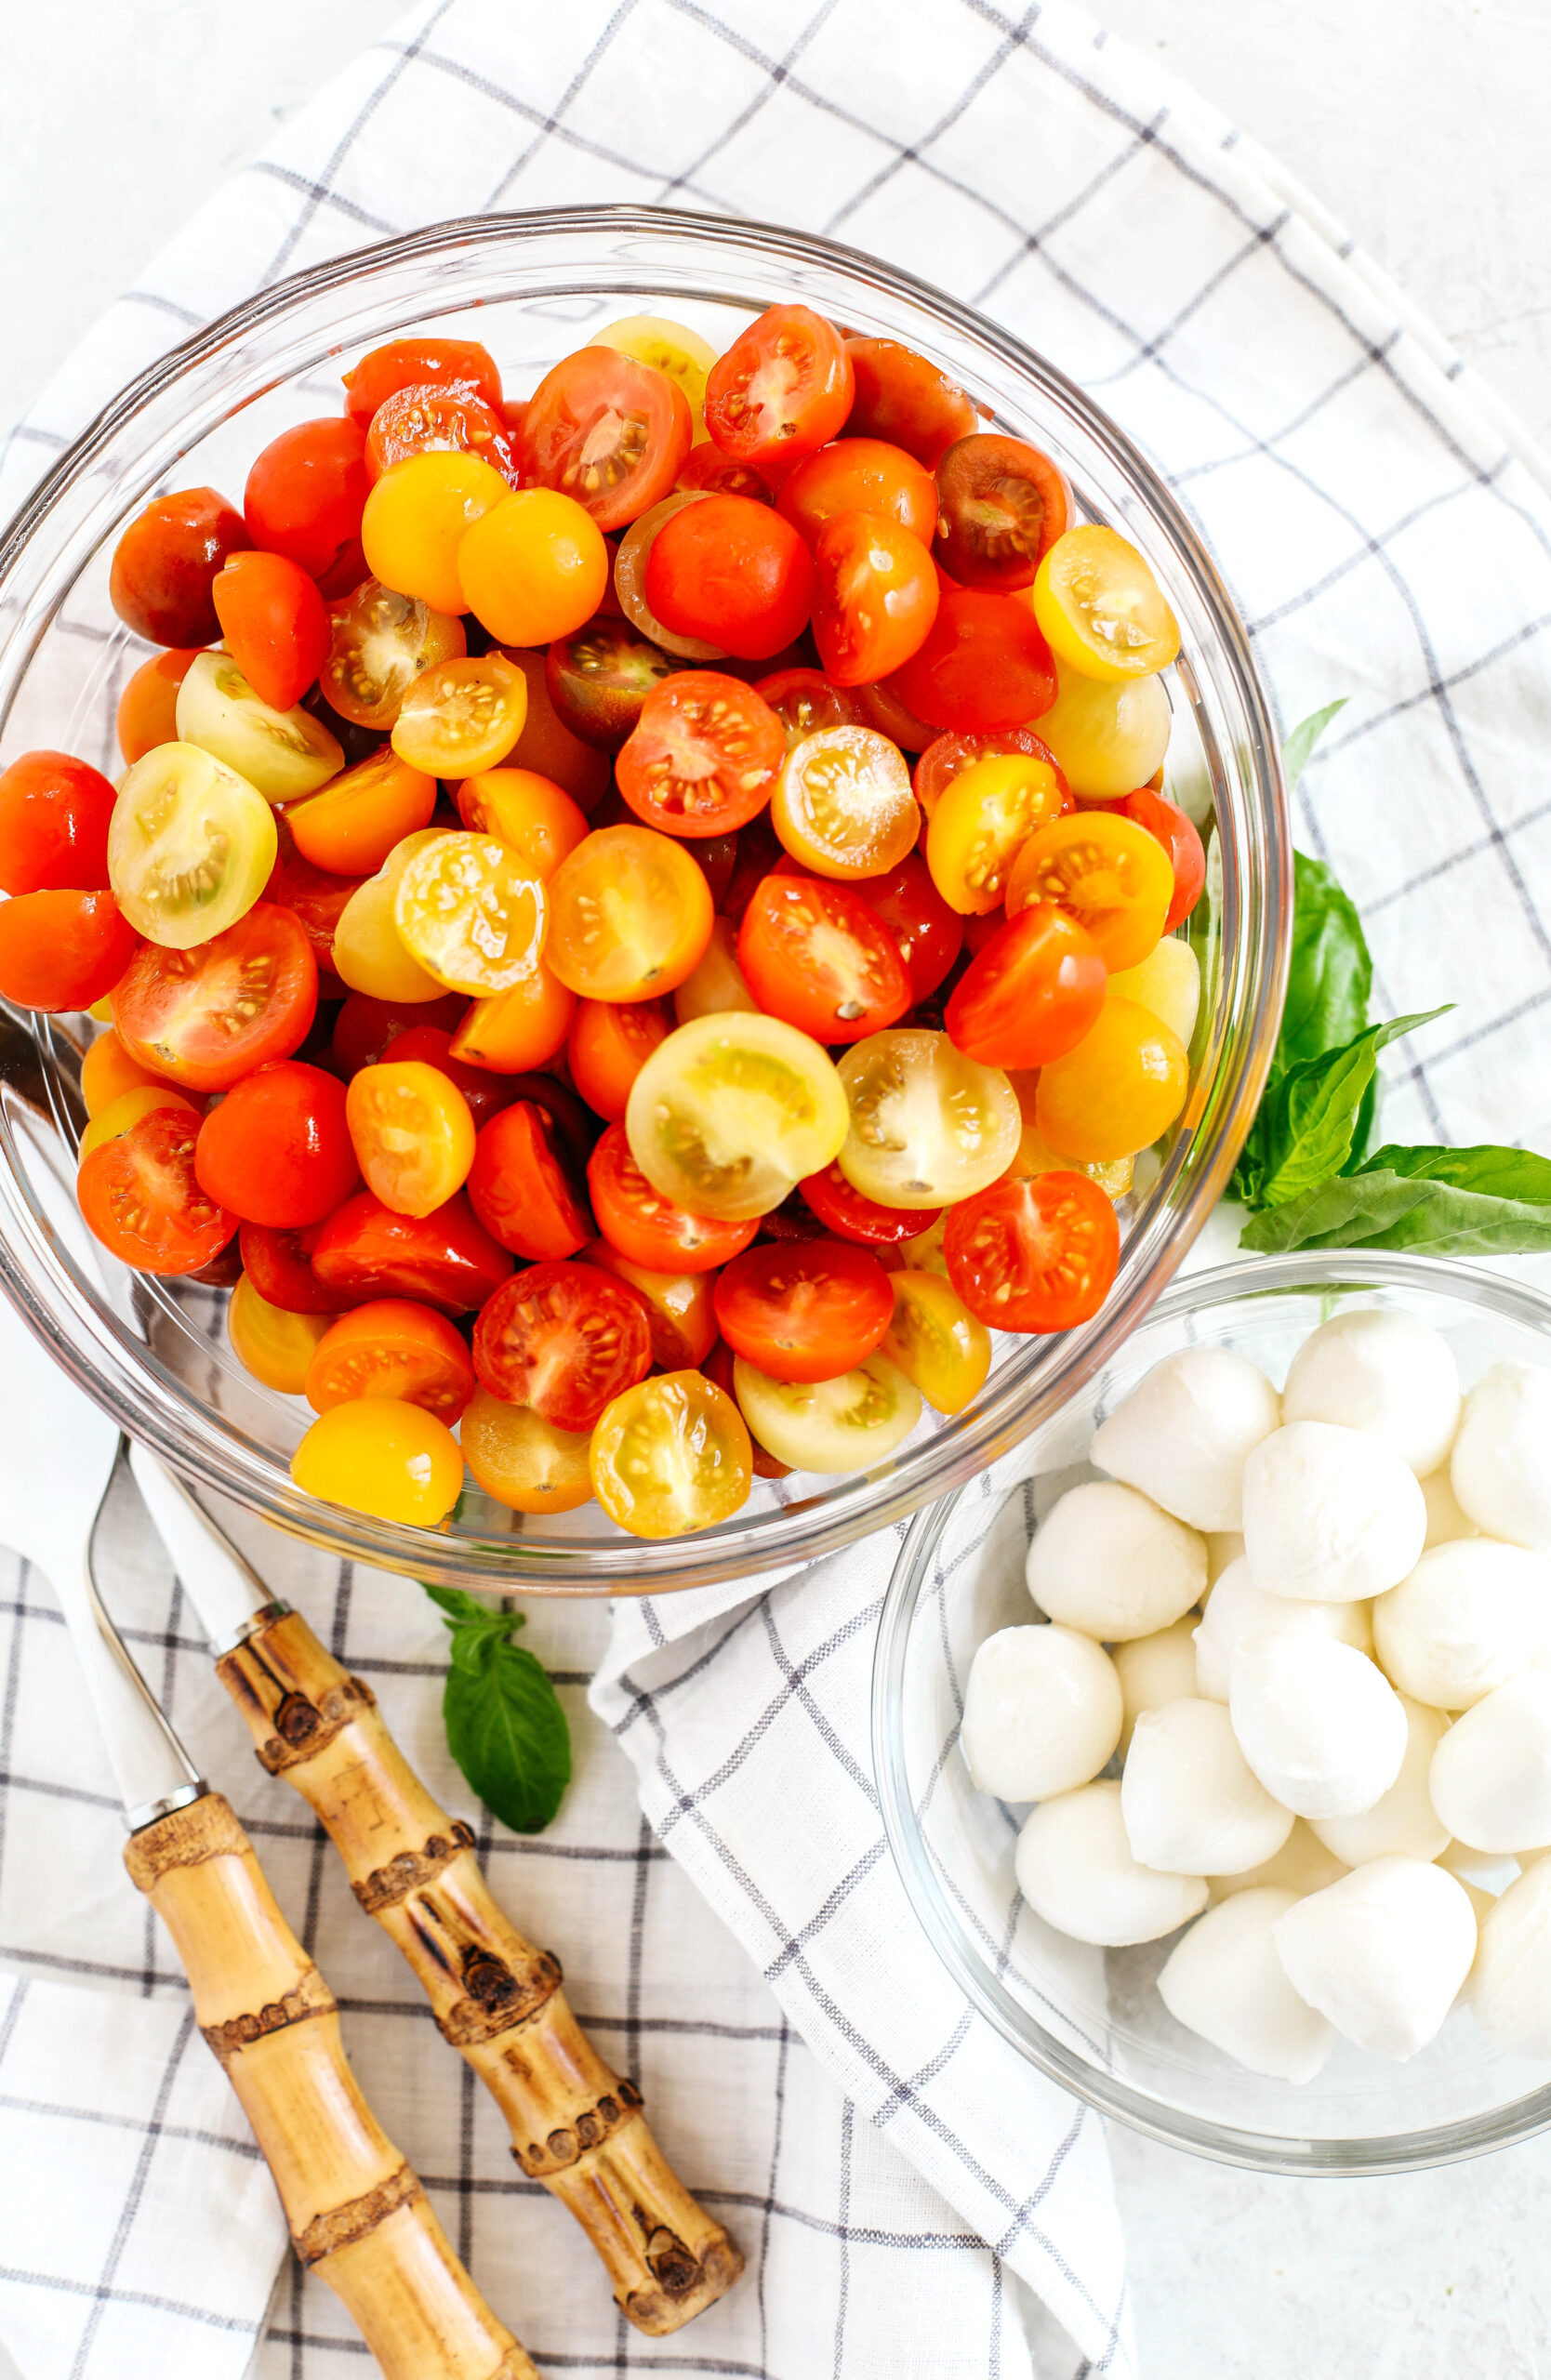 This Summer Caprese Salad is loaded with juicy tomatoes and creamy balls of mozzarella cheese all marinated in a delicious combination of olive oil, balsamic vinegar, garlic and fresh herbs!